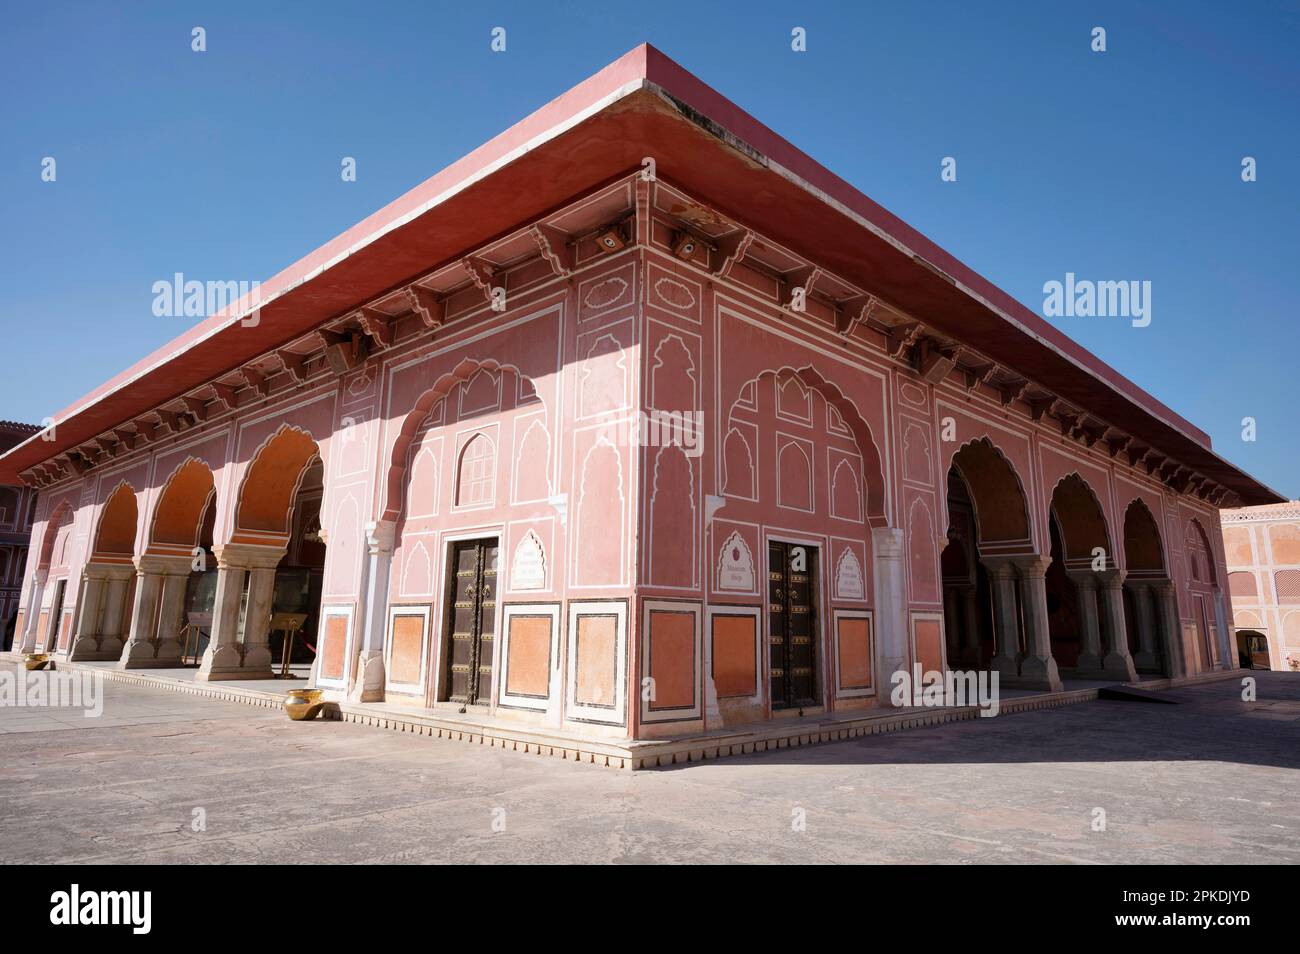 Exteriors of the Sarvato Bhadra, a single-storeyed, square, open hall with enclosed rooms at the four corners. City Palace, Jaipur, Rajasthan, India Stock Photo